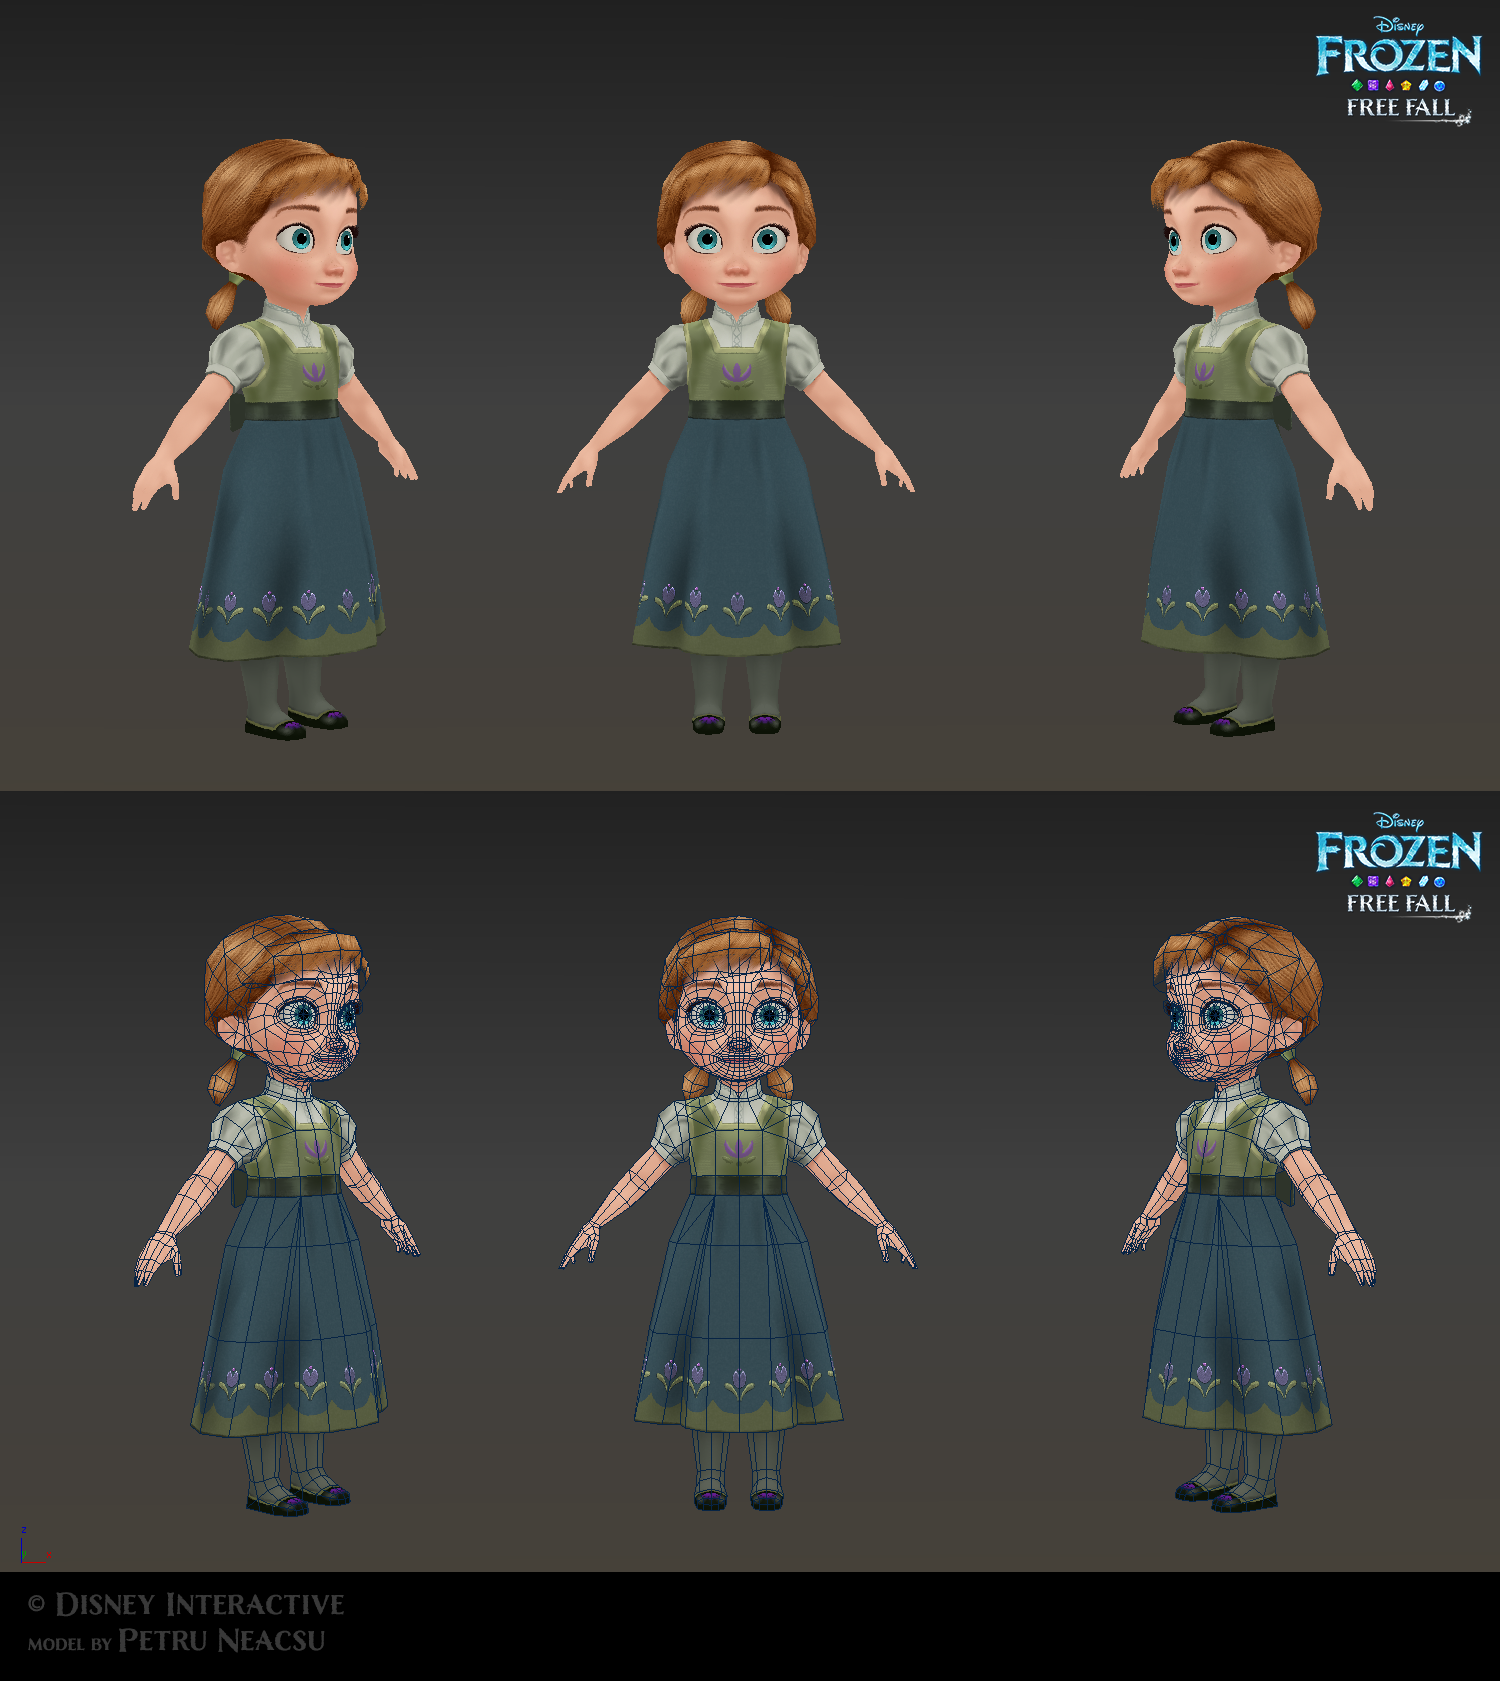 Anna child - Low poly model for Frozen Free Fall